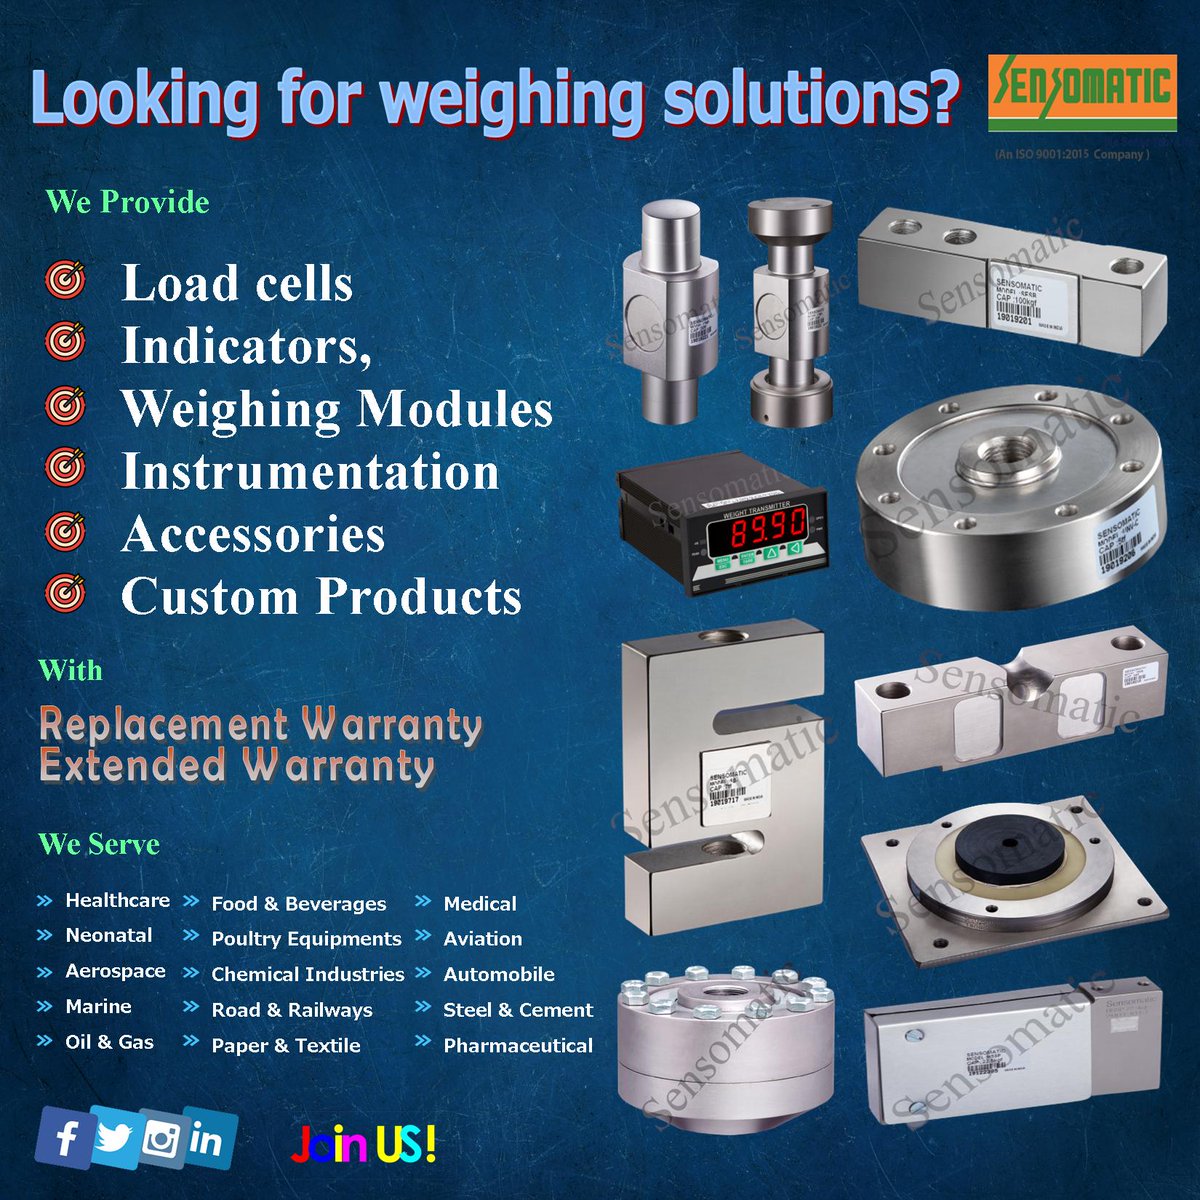 We are a Manufacturer & Trader of High Precision Loadcells & Transducers. Contact us for more info at +91 95660 22667
#loadcells #forcemeasurement #weighingsystems #Industrialweighing #materialtesting #processcontrol #Accuracy #Durability #straingauges #weighingsensors